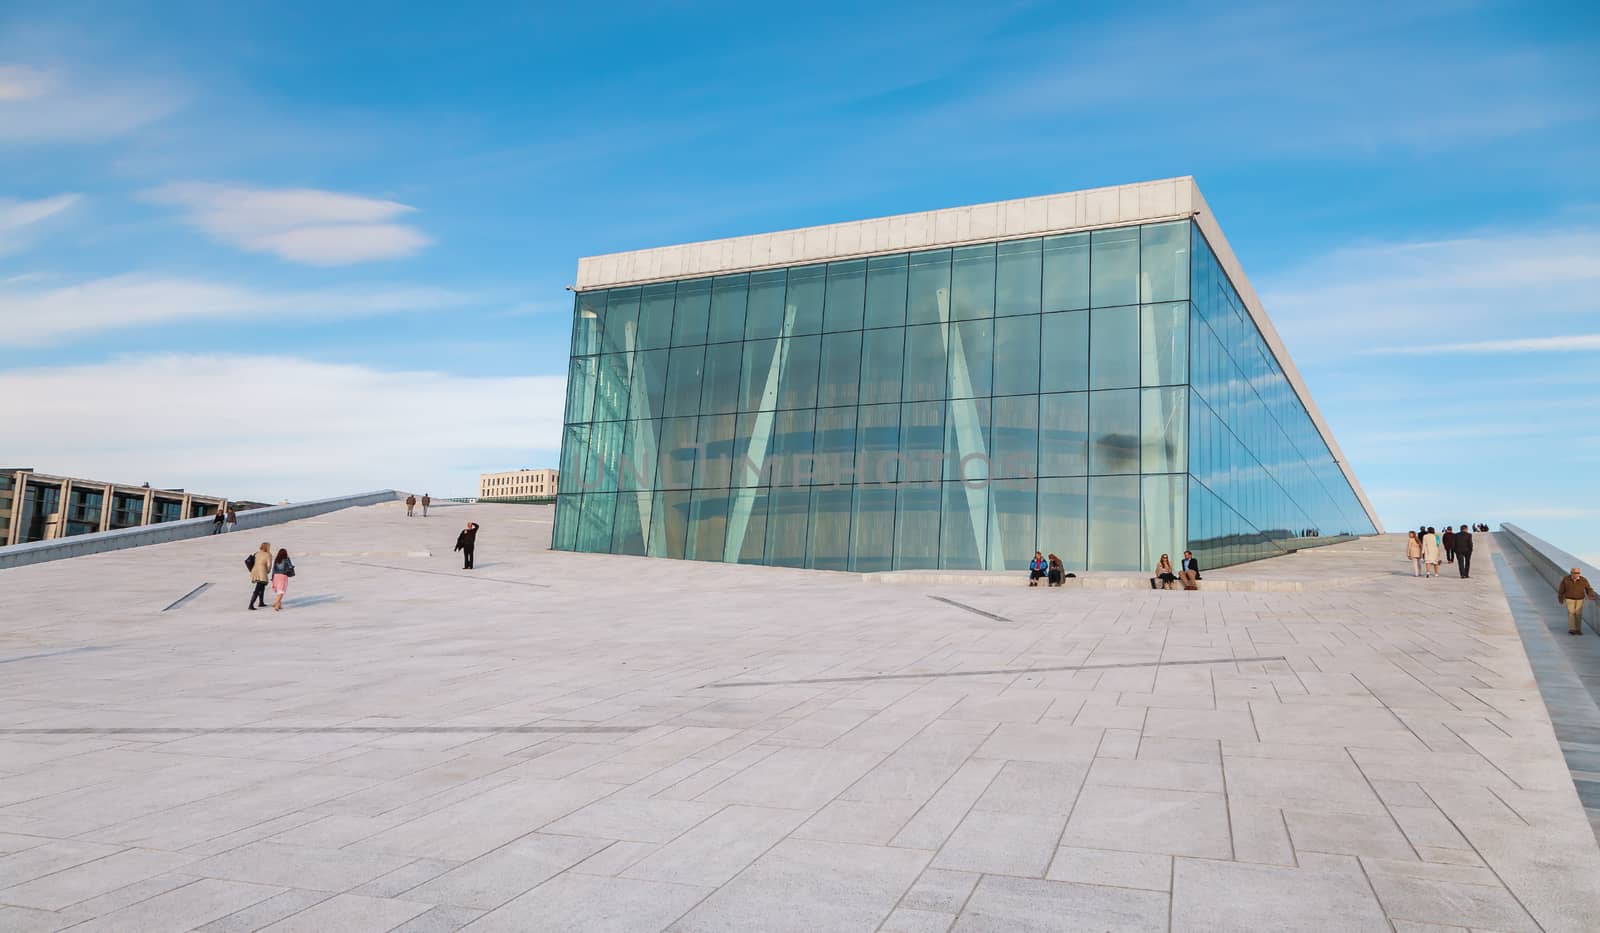 People walking on the roof of the Oslo Opera House. The Oslo Opera House is home The Norwegian National Opera and Ballet, and the National Opera Theatre. by master1305